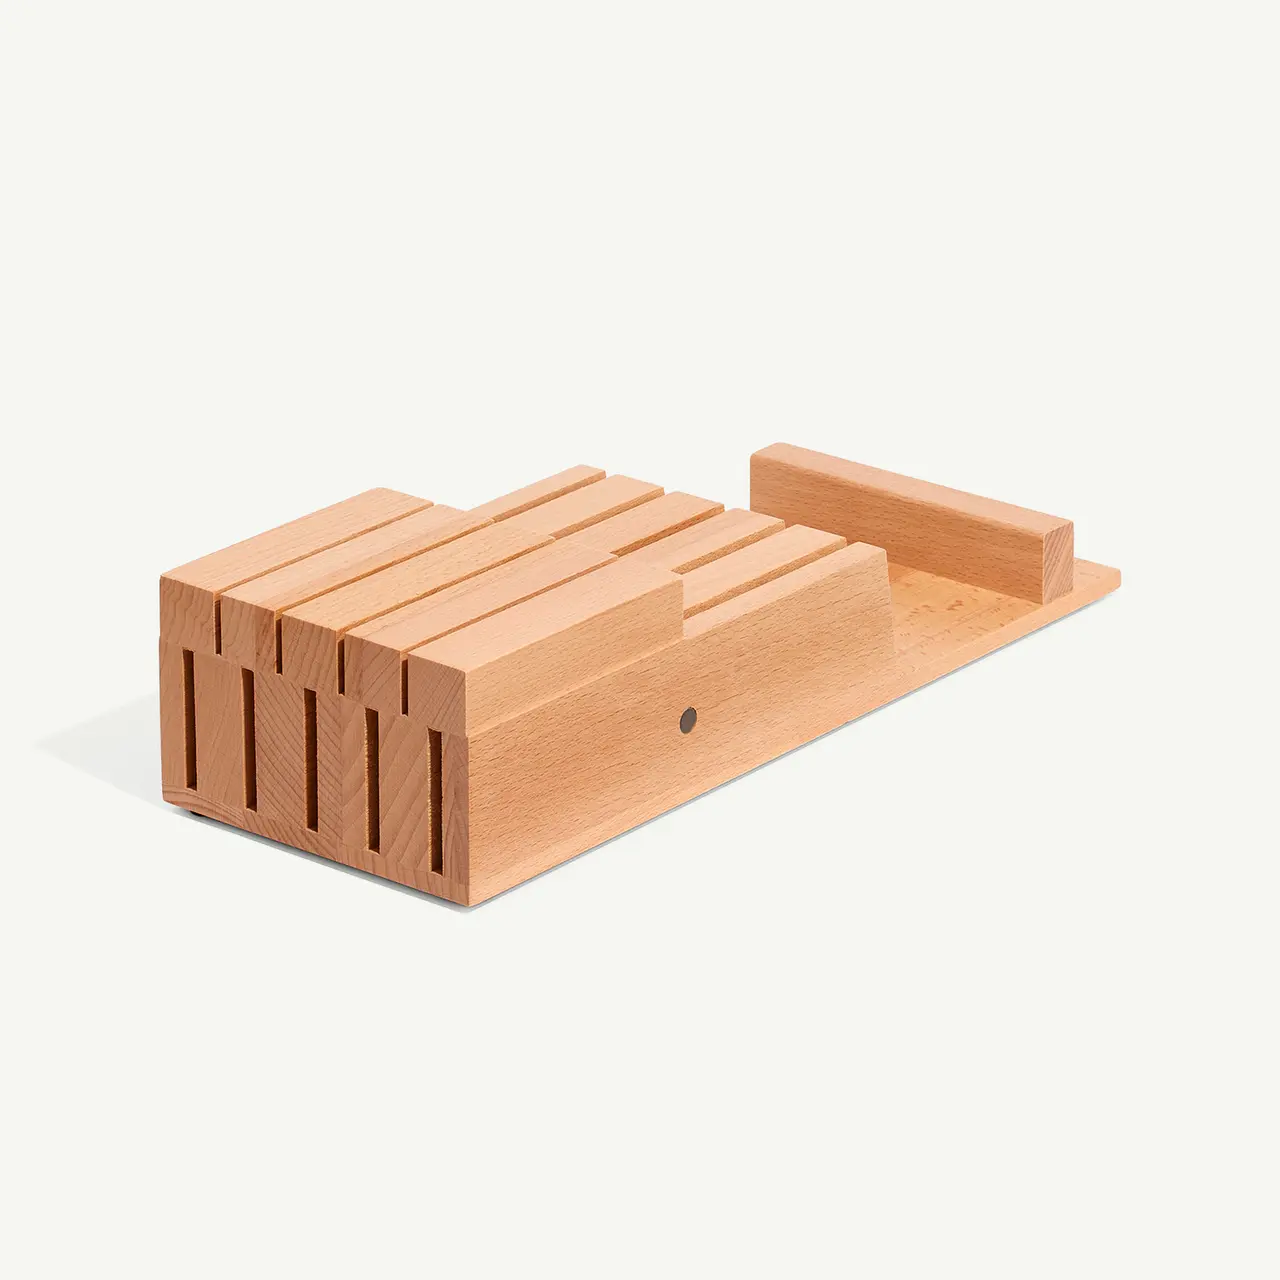 A wooden knife block with slots for storing kitchen knives sits against a light background.